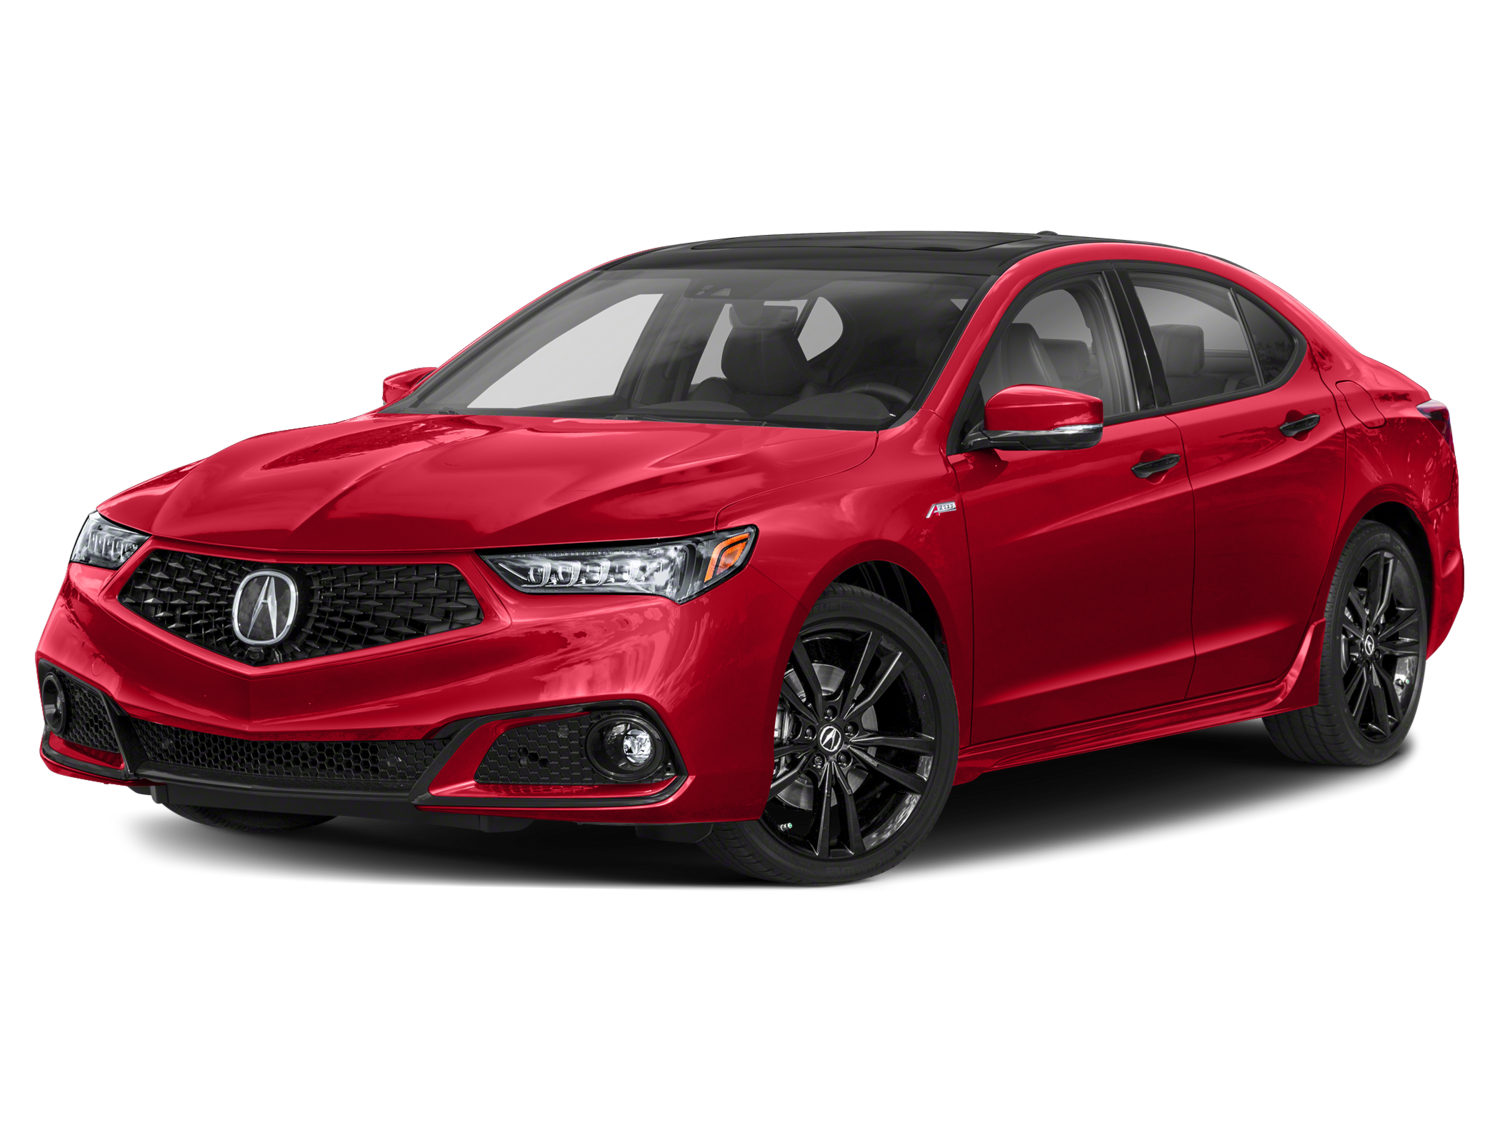 ACURA TLX 3.5L - J35Y6 V6 ( 2015 - 2020 )- STAGE 1 PERFORMANCE SOFTWARE TUNE